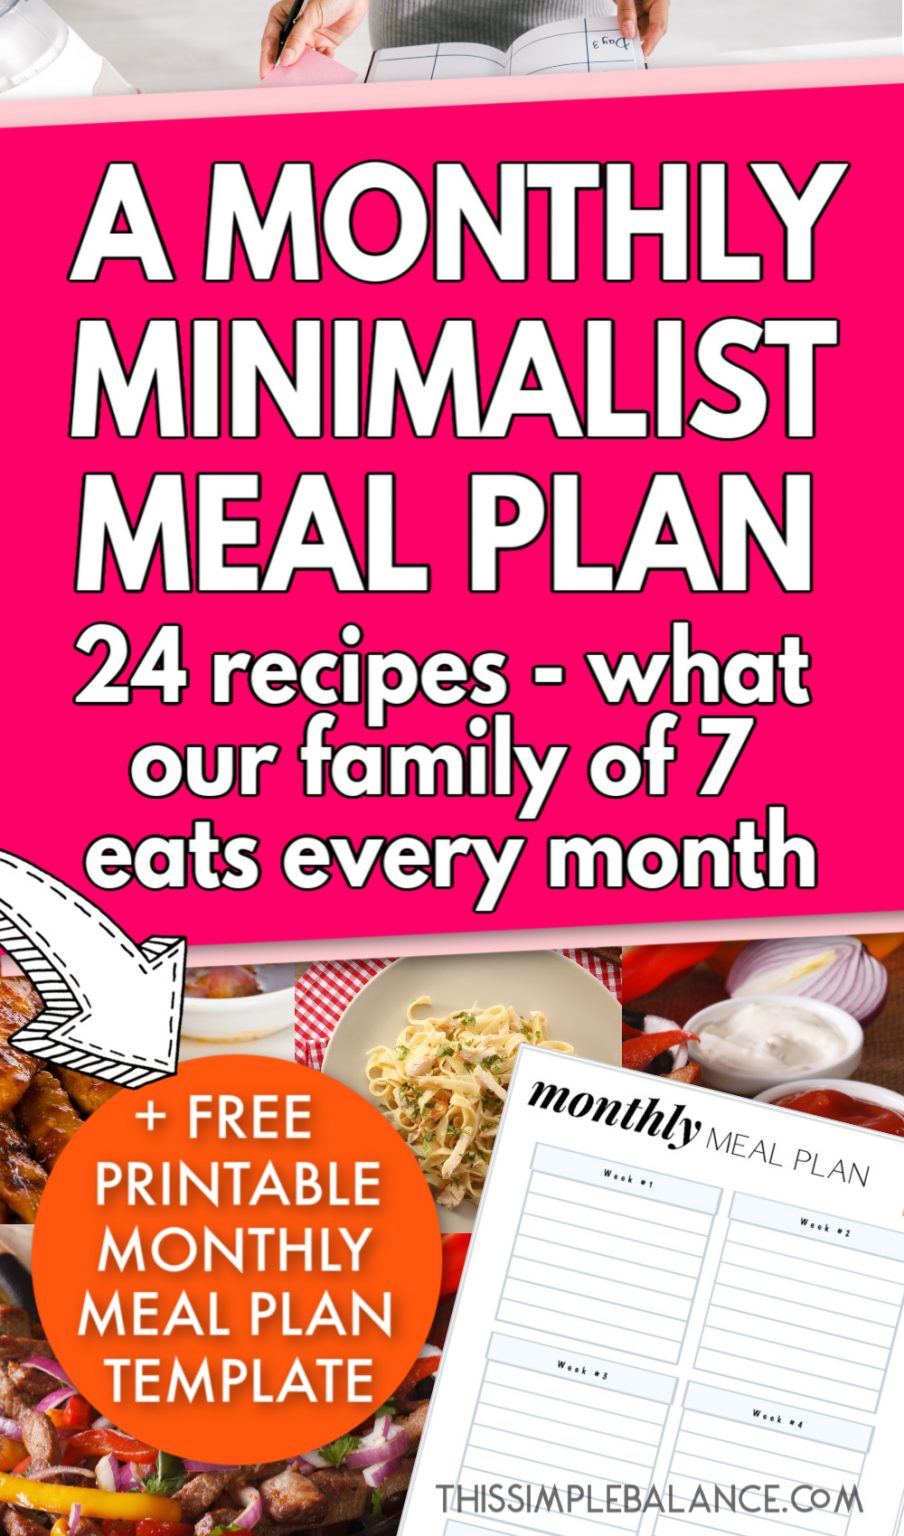 FREE Monthly Meal Planner Printable + Example Meal Plan This Simple